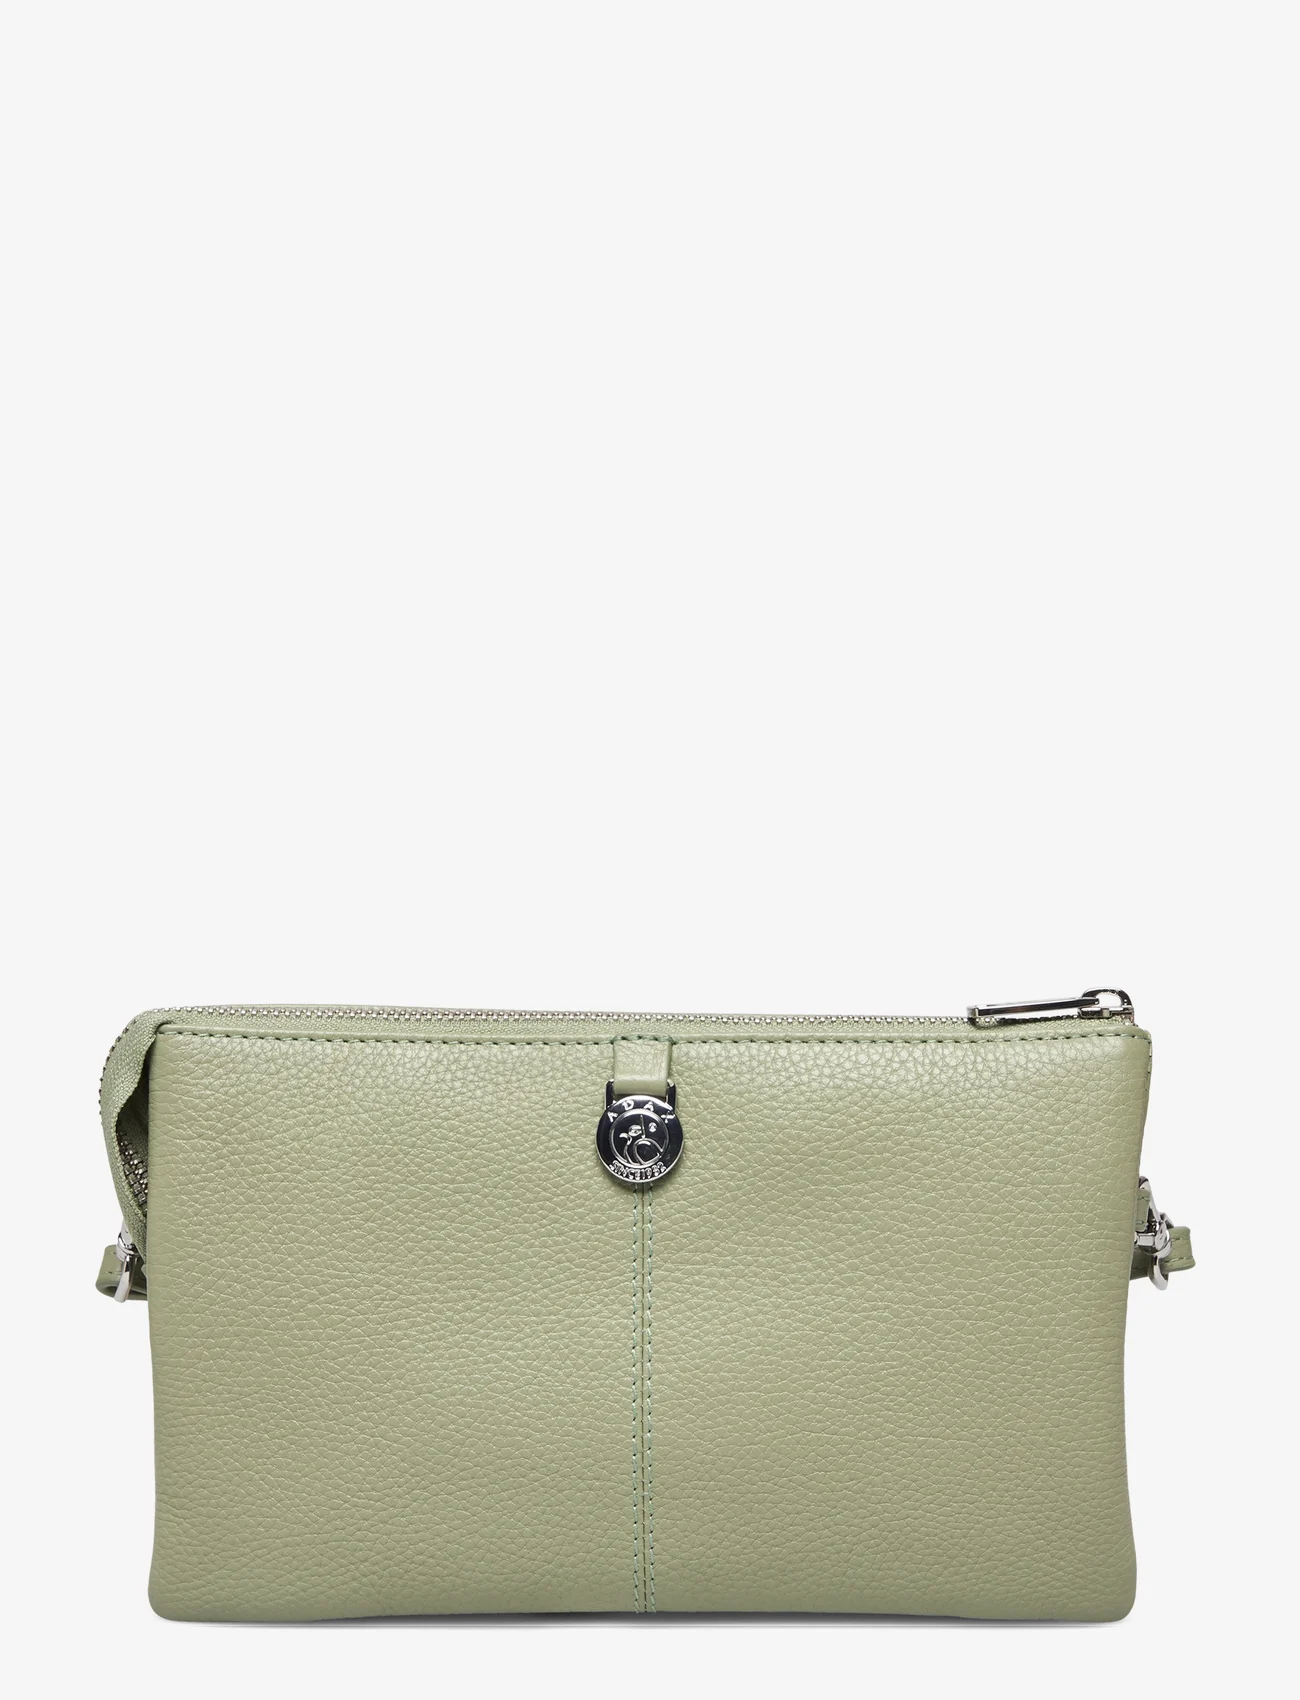 Adax - Cormorano combi clutch Silja - party wear at outlet prices - green - 1